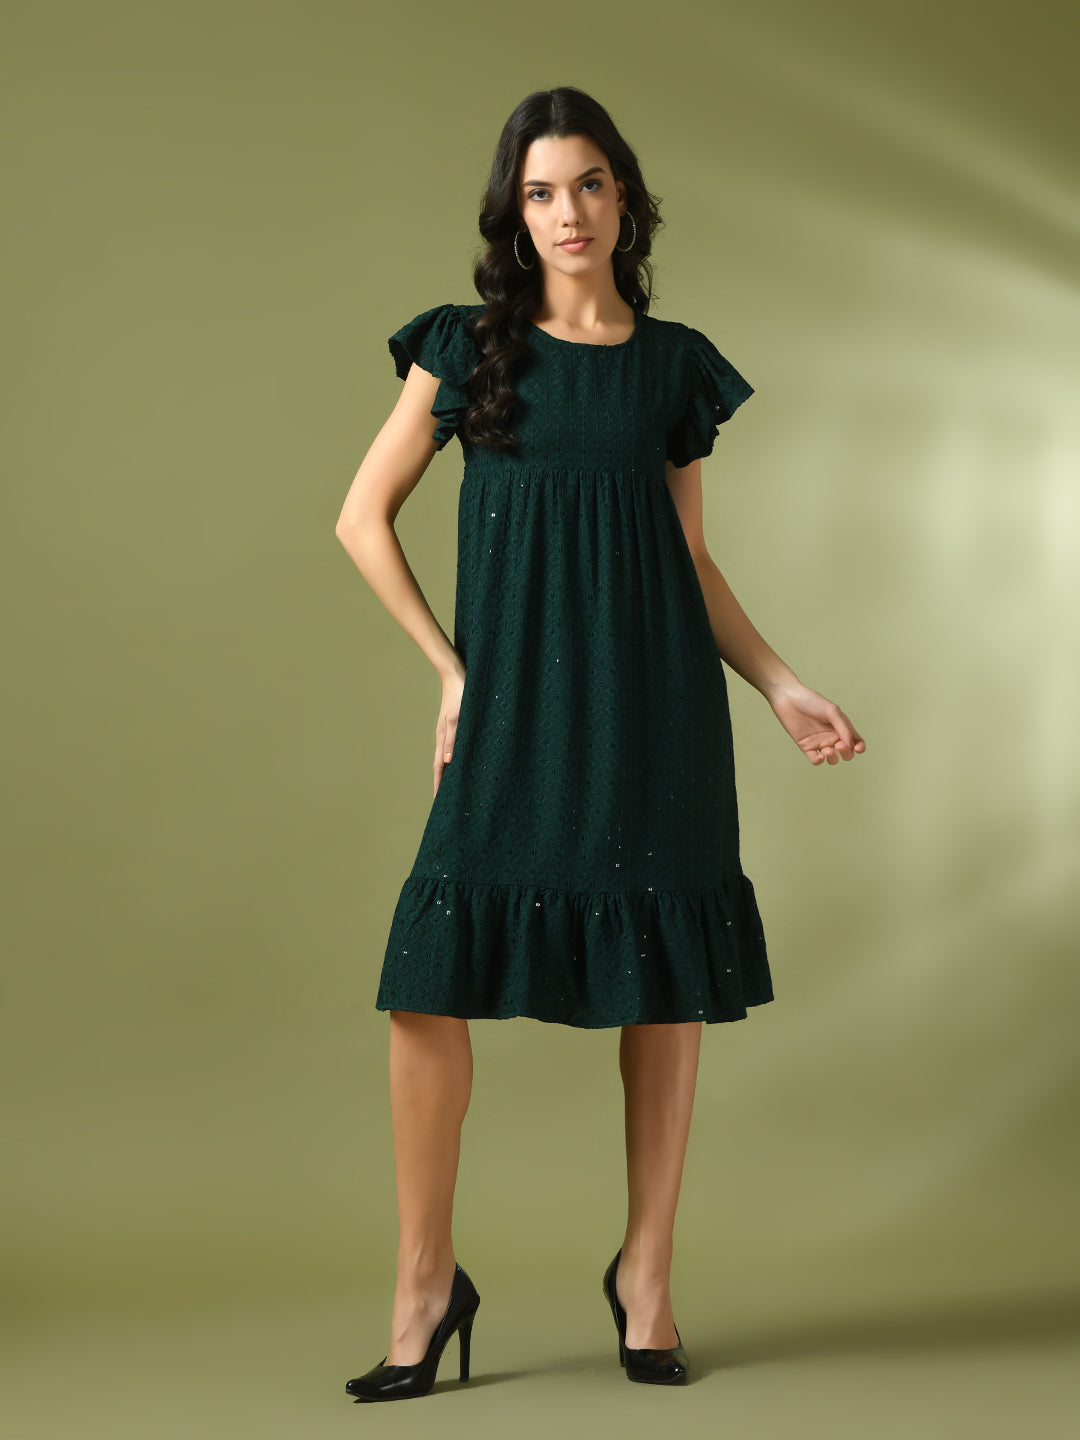 Women's  Green Embroidered Cotton Round Neck A-Line Party Dress  - Myshka